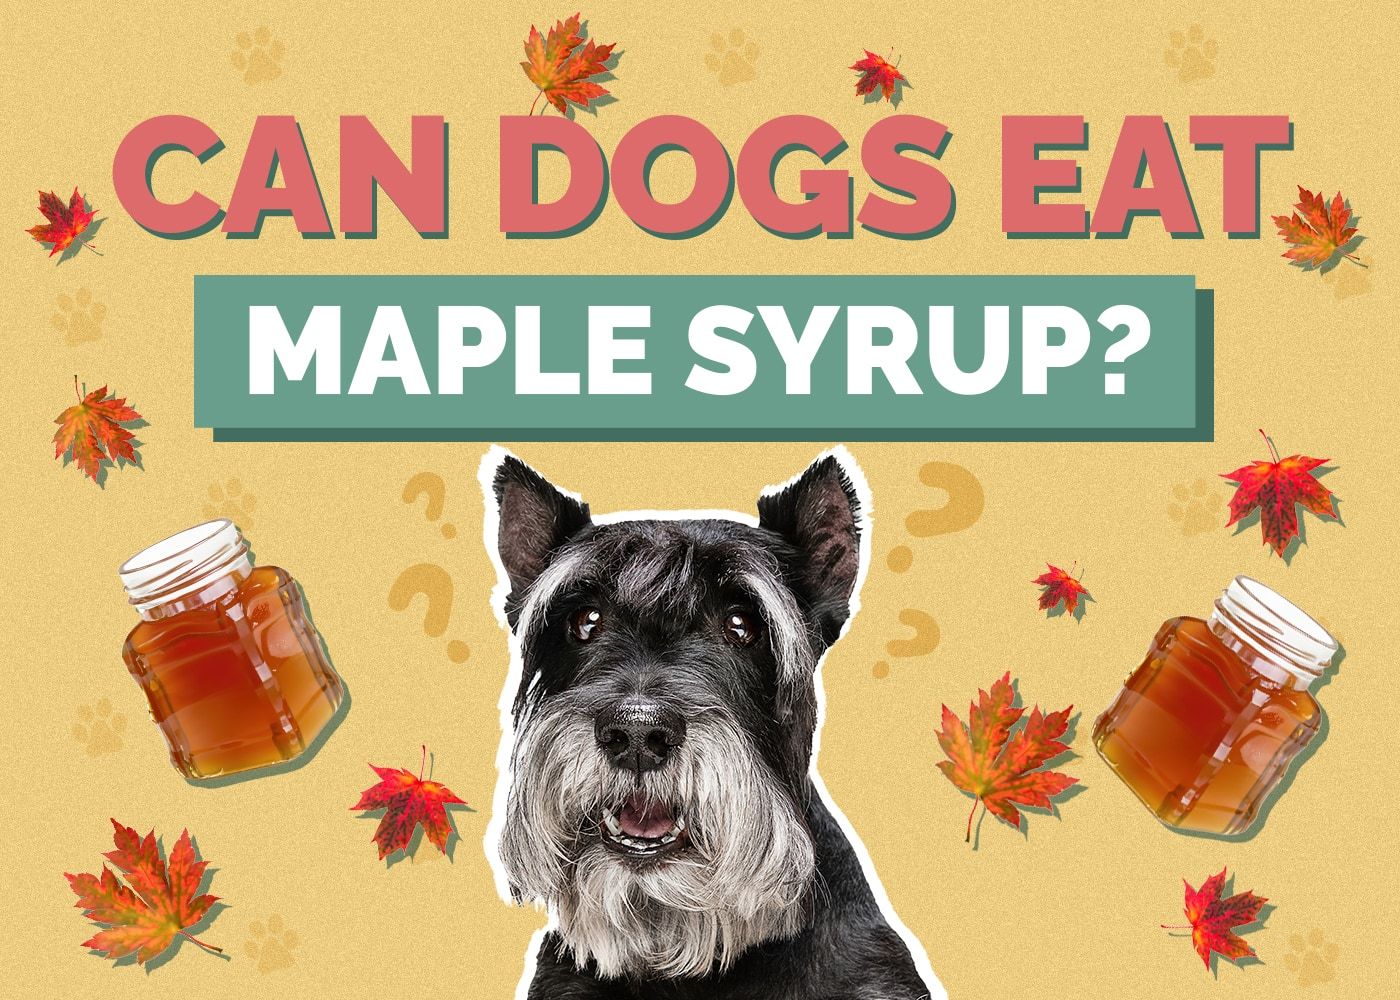 Can Dogs Have Maple Syrup?